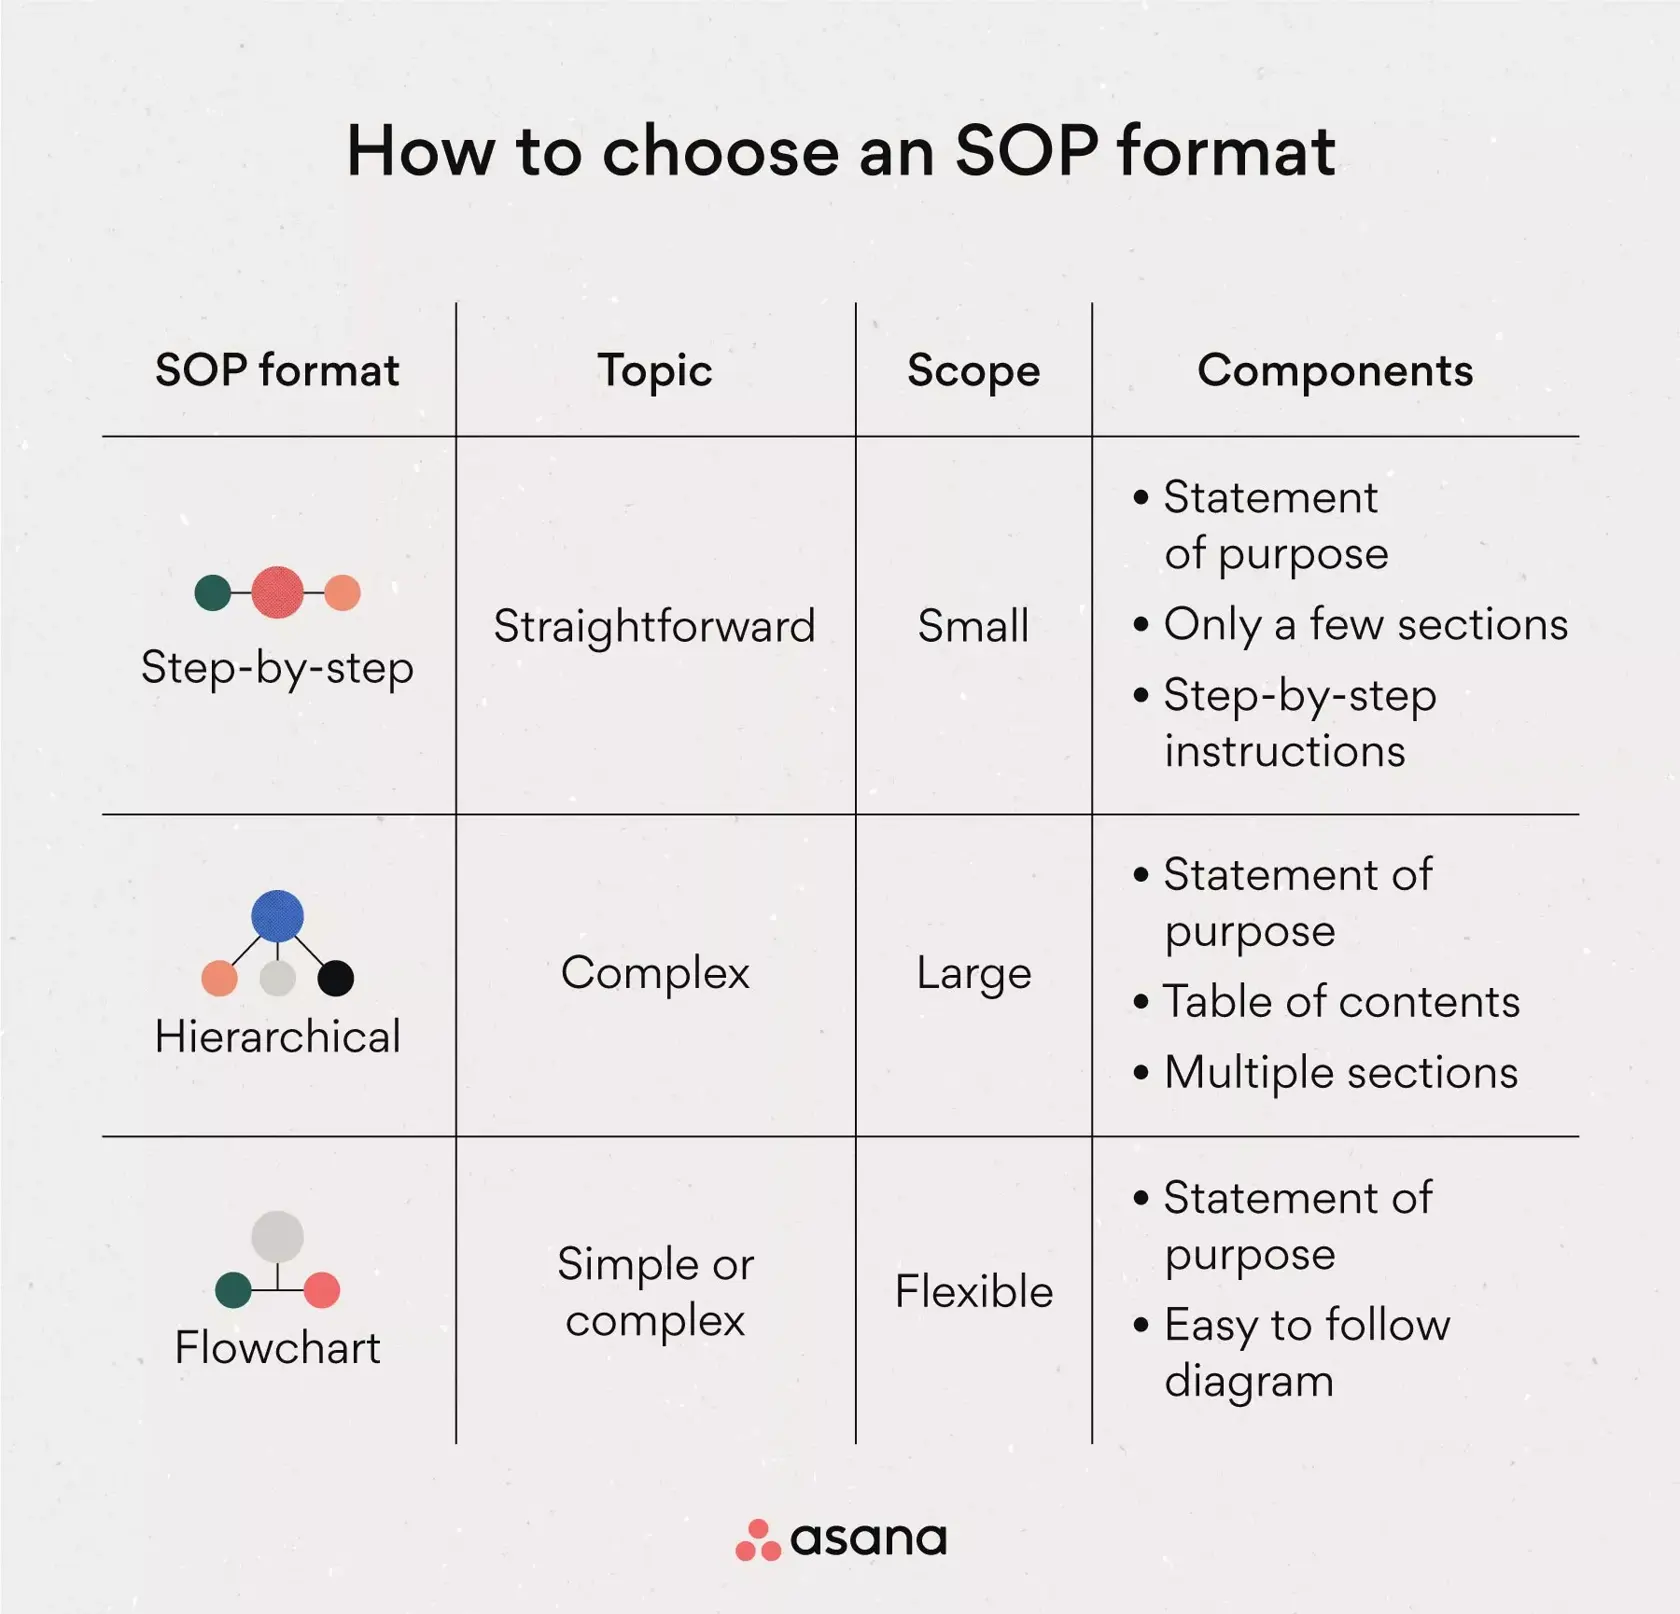 [inline illustration] How to choose an SOP format (infographic)